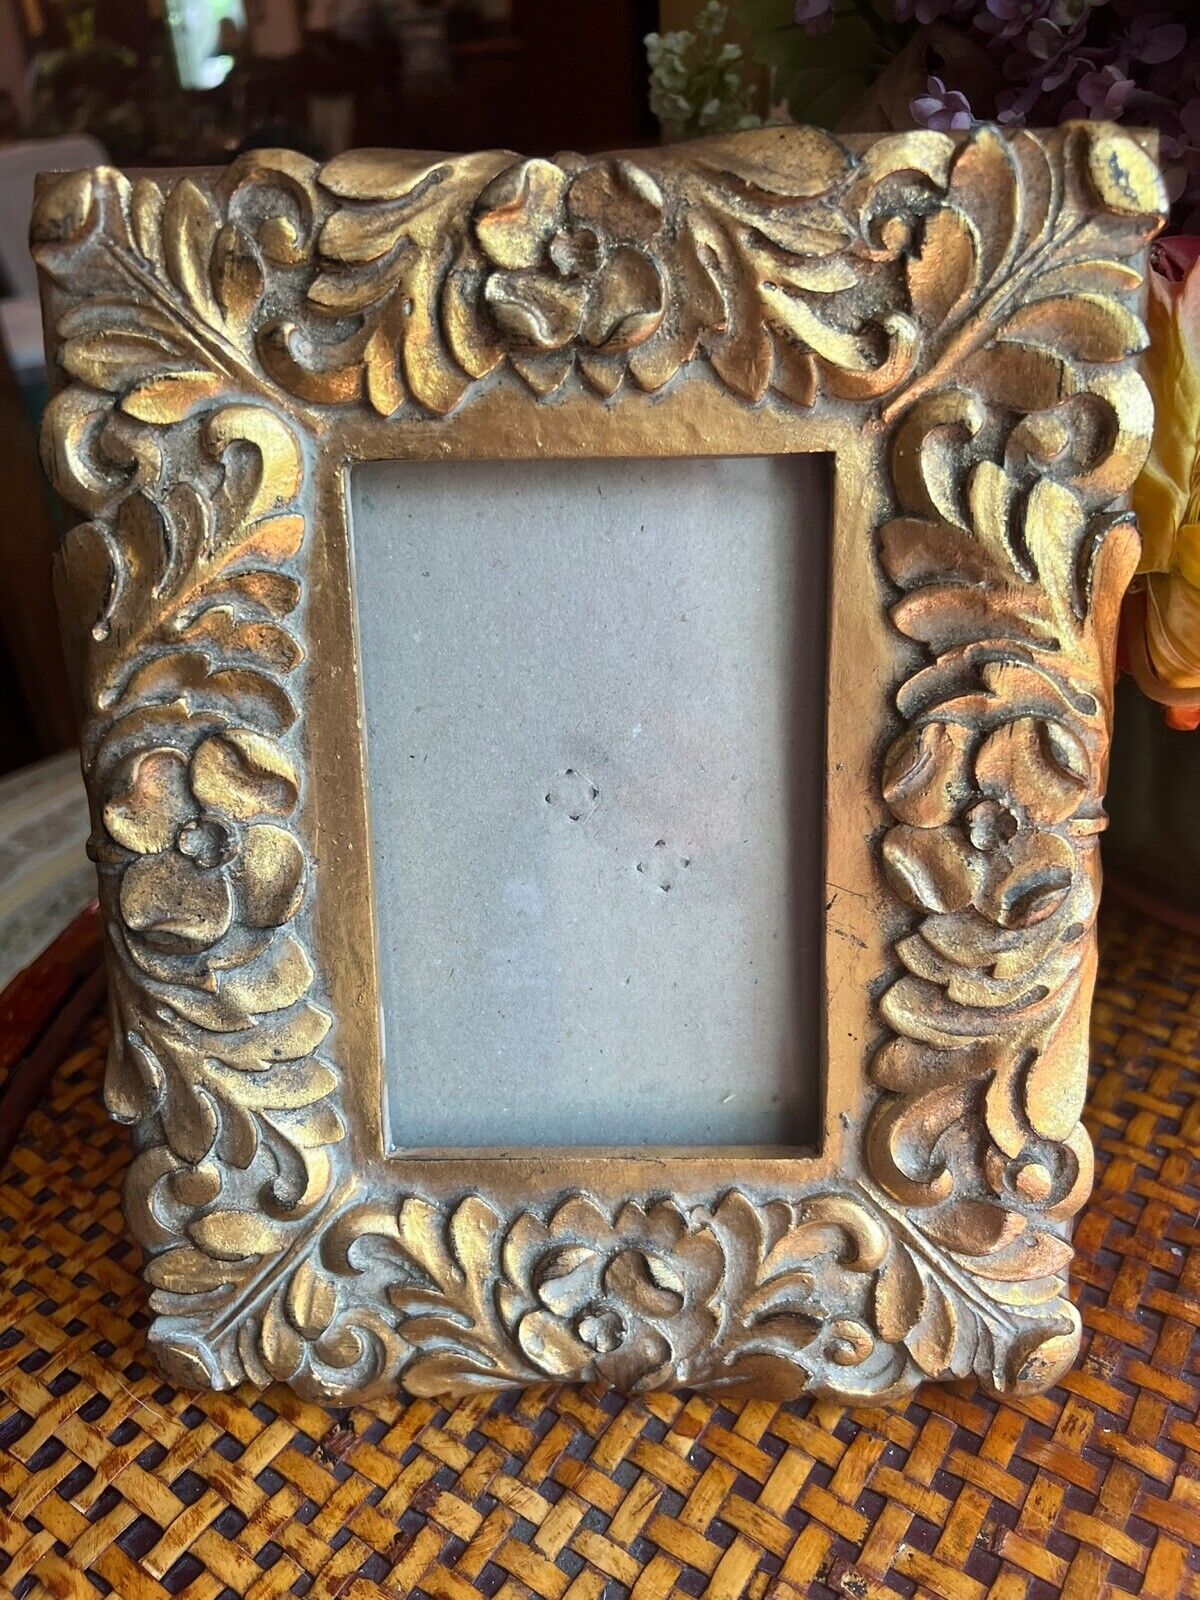 GOLD ORNATE Picture Frame Easel Back flowers 10” by 8” heavy